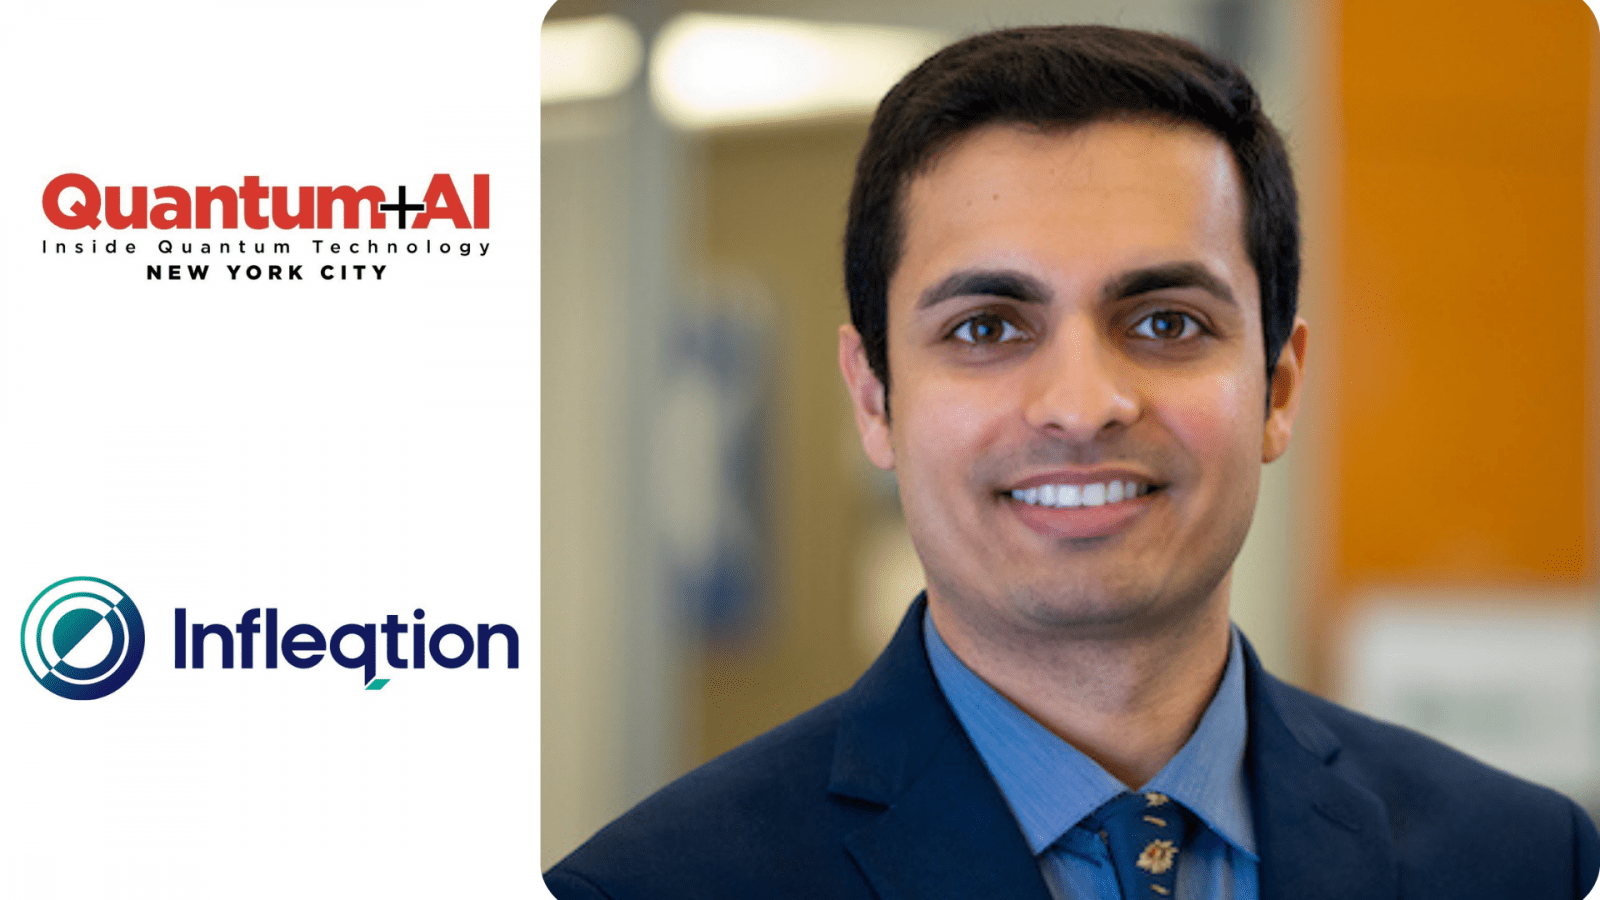 Pranav Gokhale, VP of Quantum Software at Infleqtion is an IQT Quantum + AI conference speaker in 2024